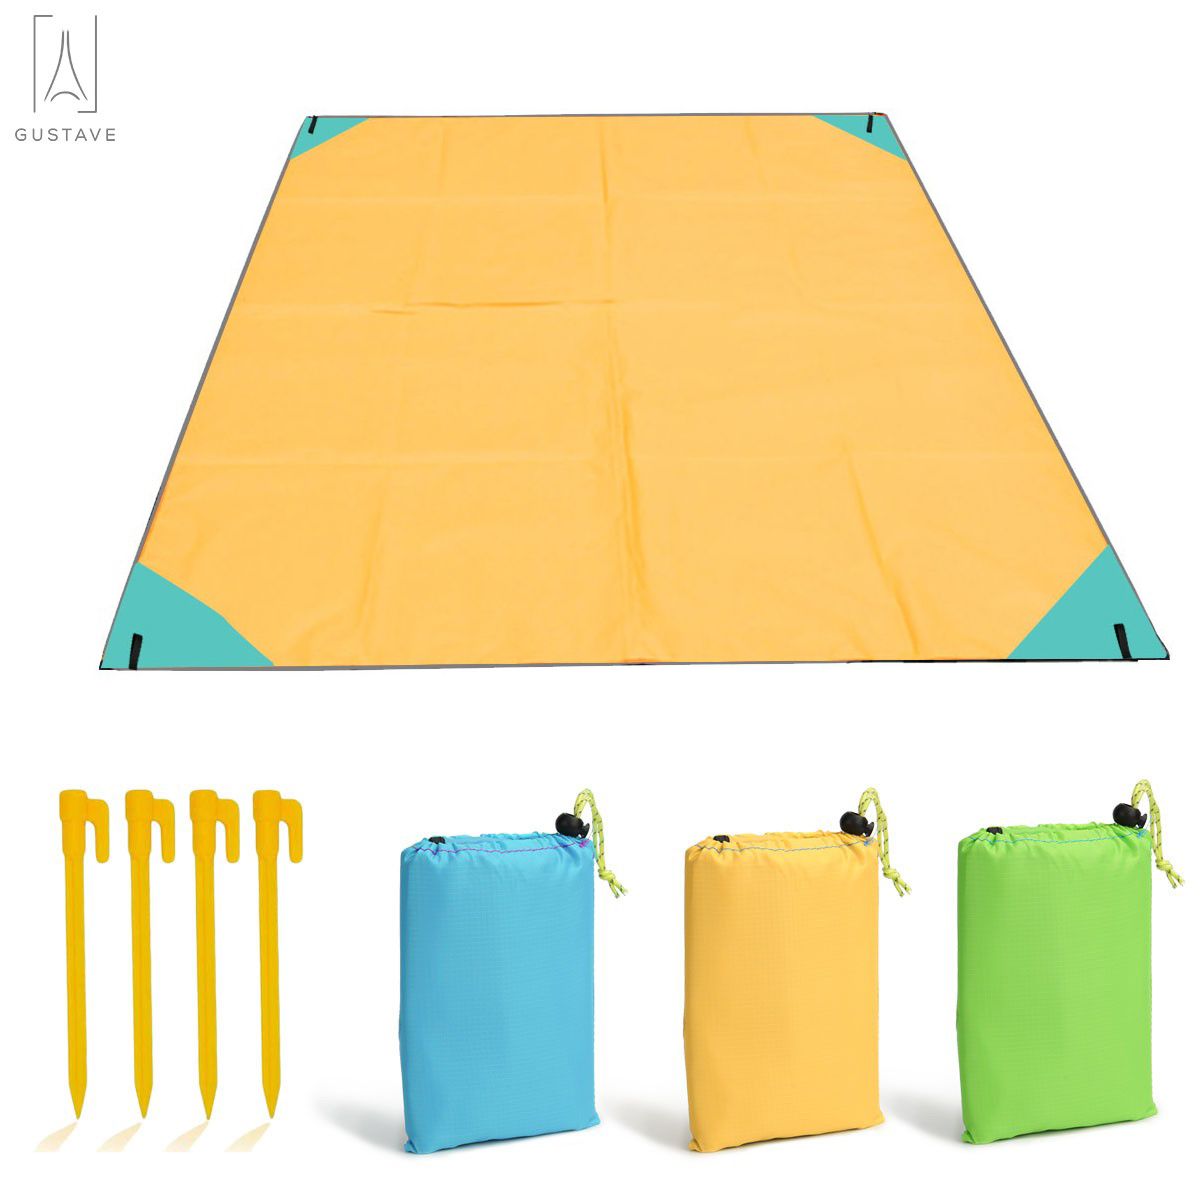 Gustave Beach Blanket Picnic Mat Camping Ground Mat Mattress Outdoor Blanket Waterproof Sandproof Beach Mat Portable Picnic Blanket with 4 Stakes & Carry Bag "Yellow" - image 1 of 9